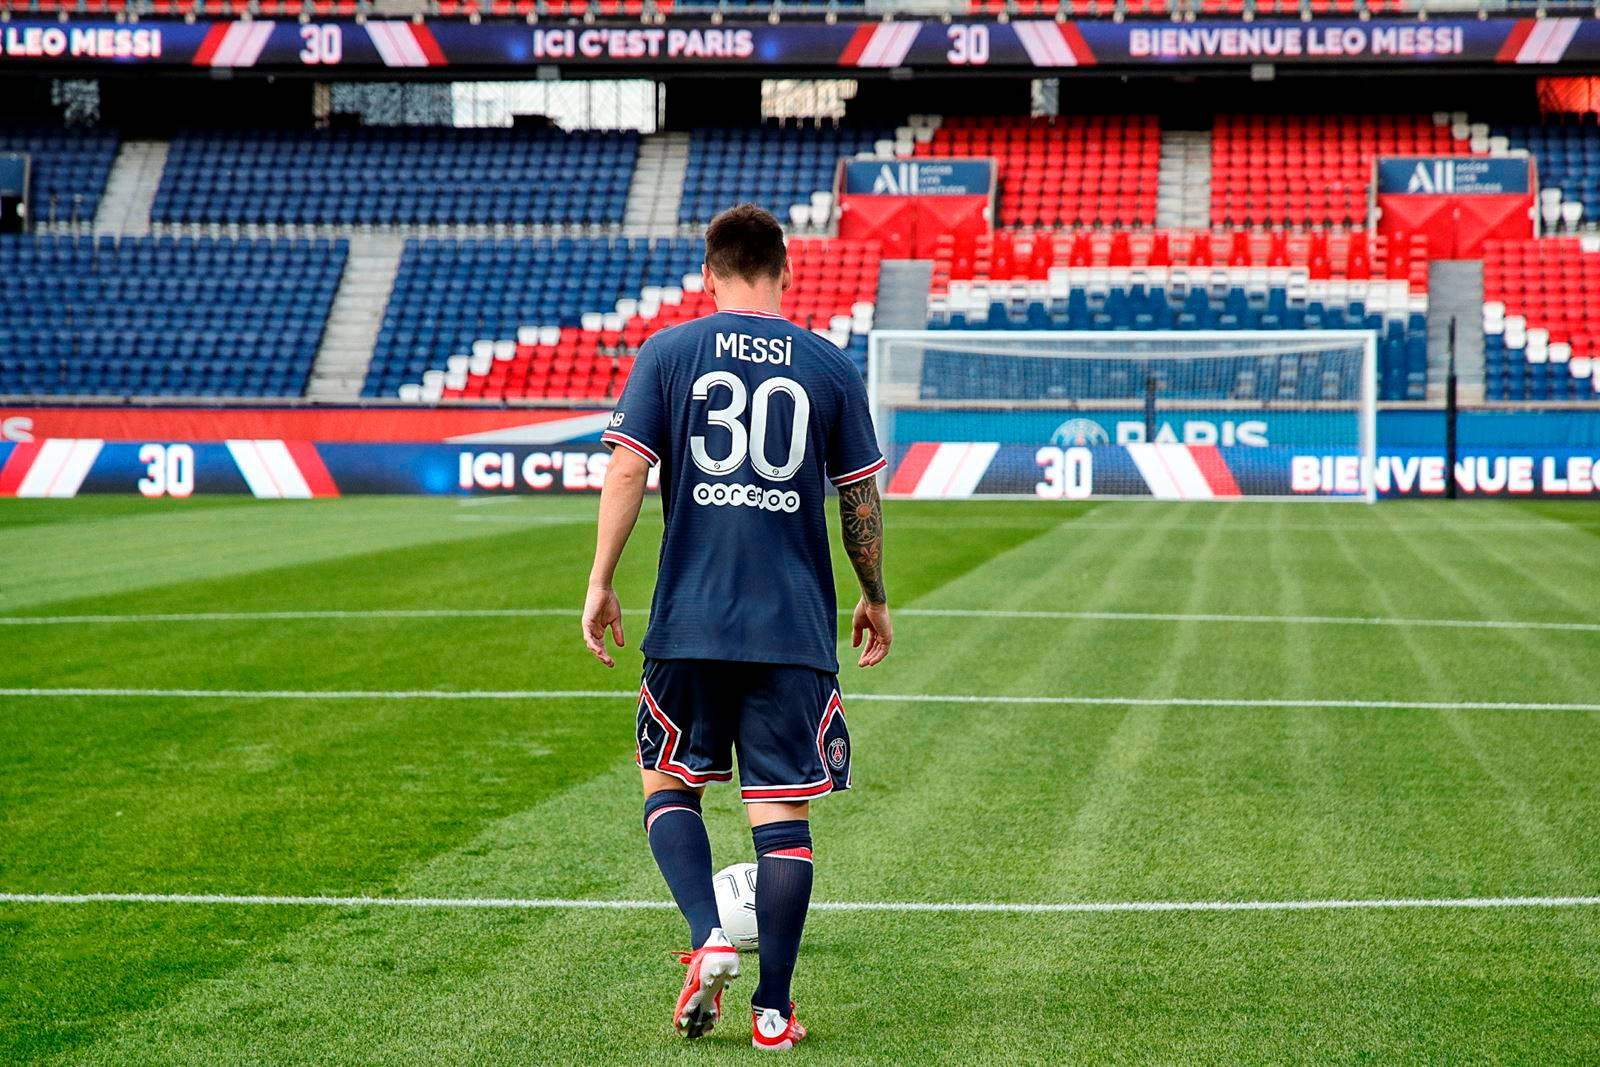 Messi Psg Football Field Background